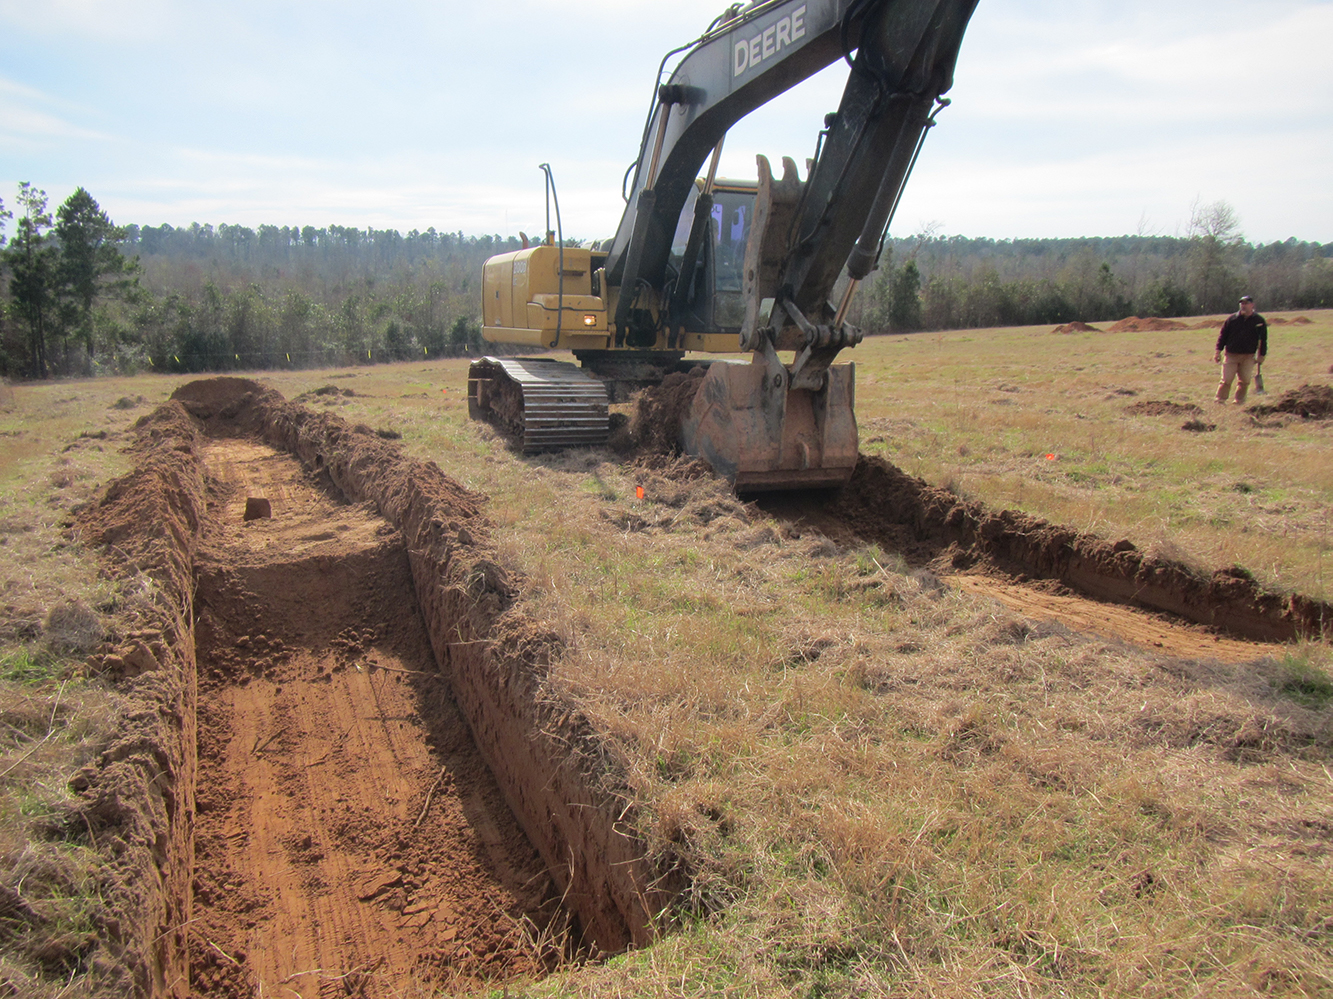 work shot photo; on left is open trench excavated into red sandy soil; on right a large trackhoe is digging a second trench.